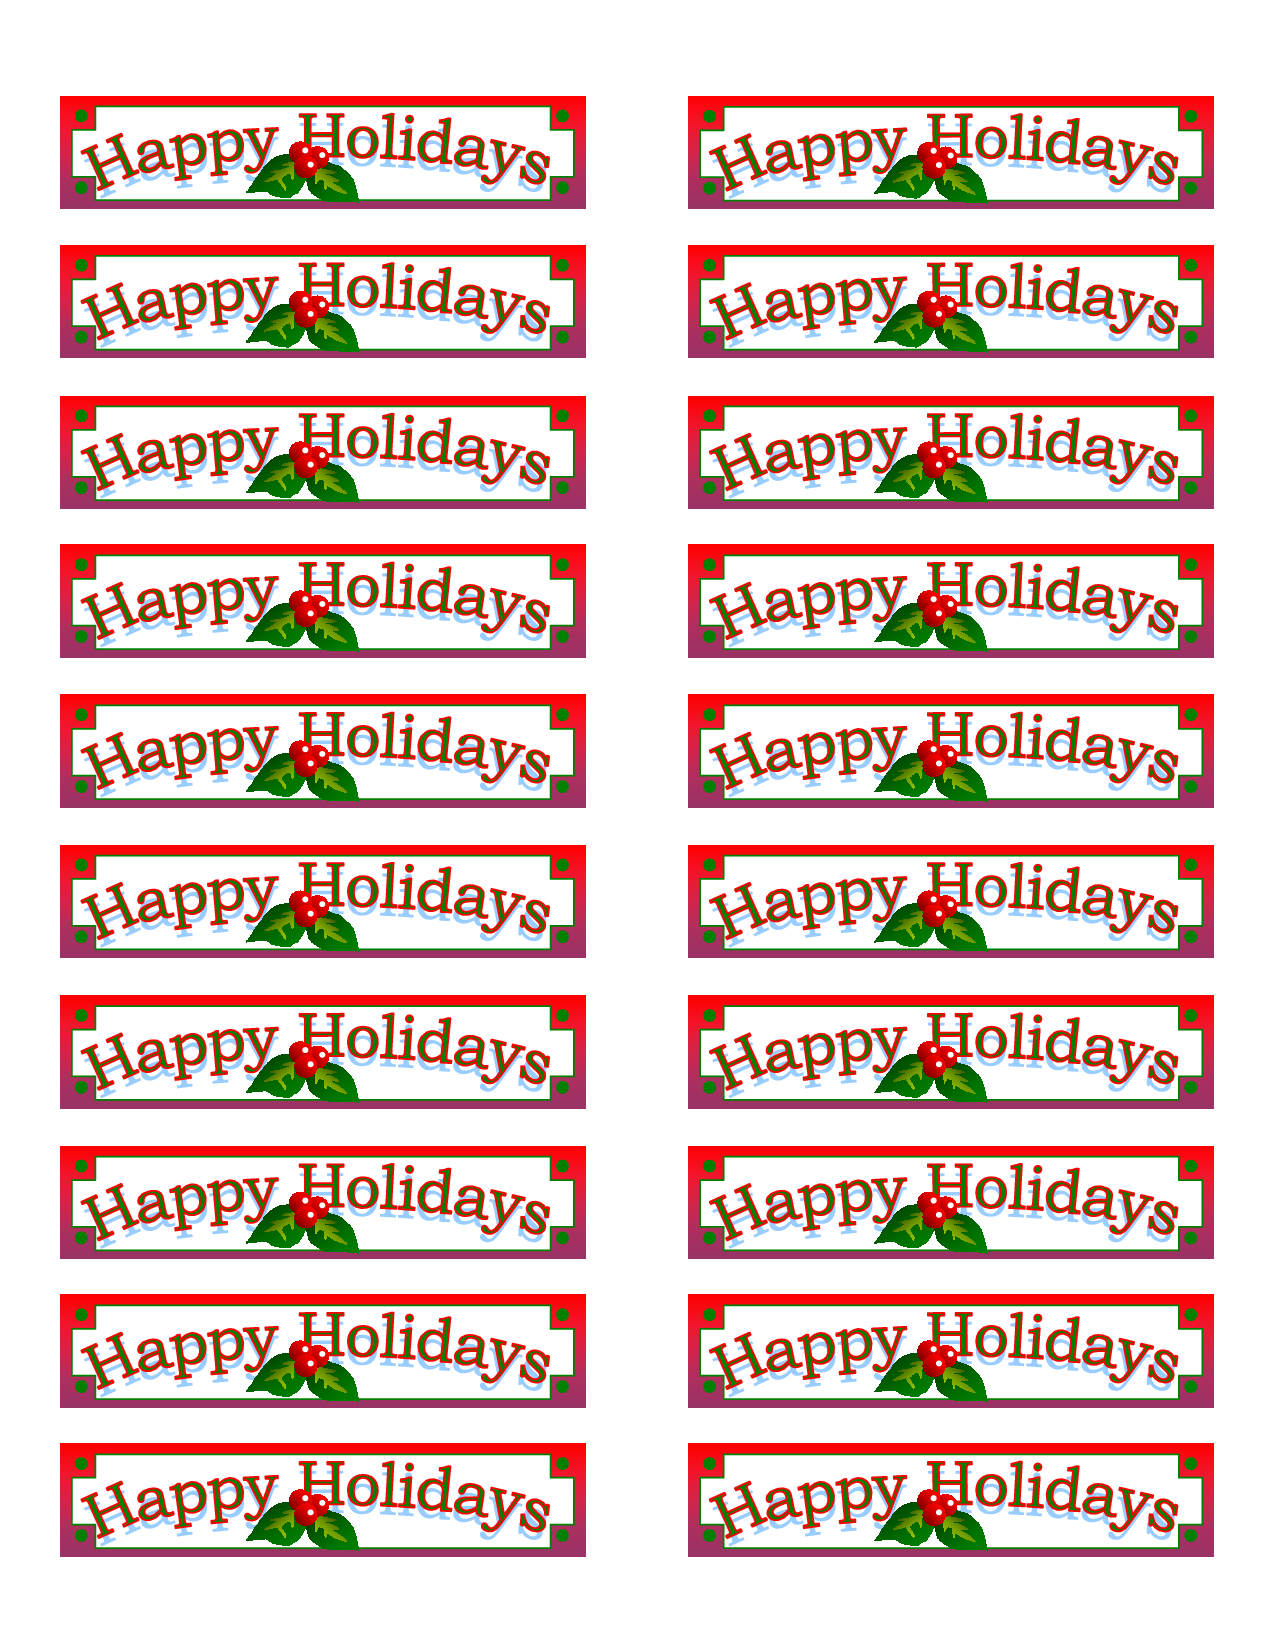 Free Christmas Label Templates Avery 5160 – Festival Collections - Free Printable Labels Avery 5160